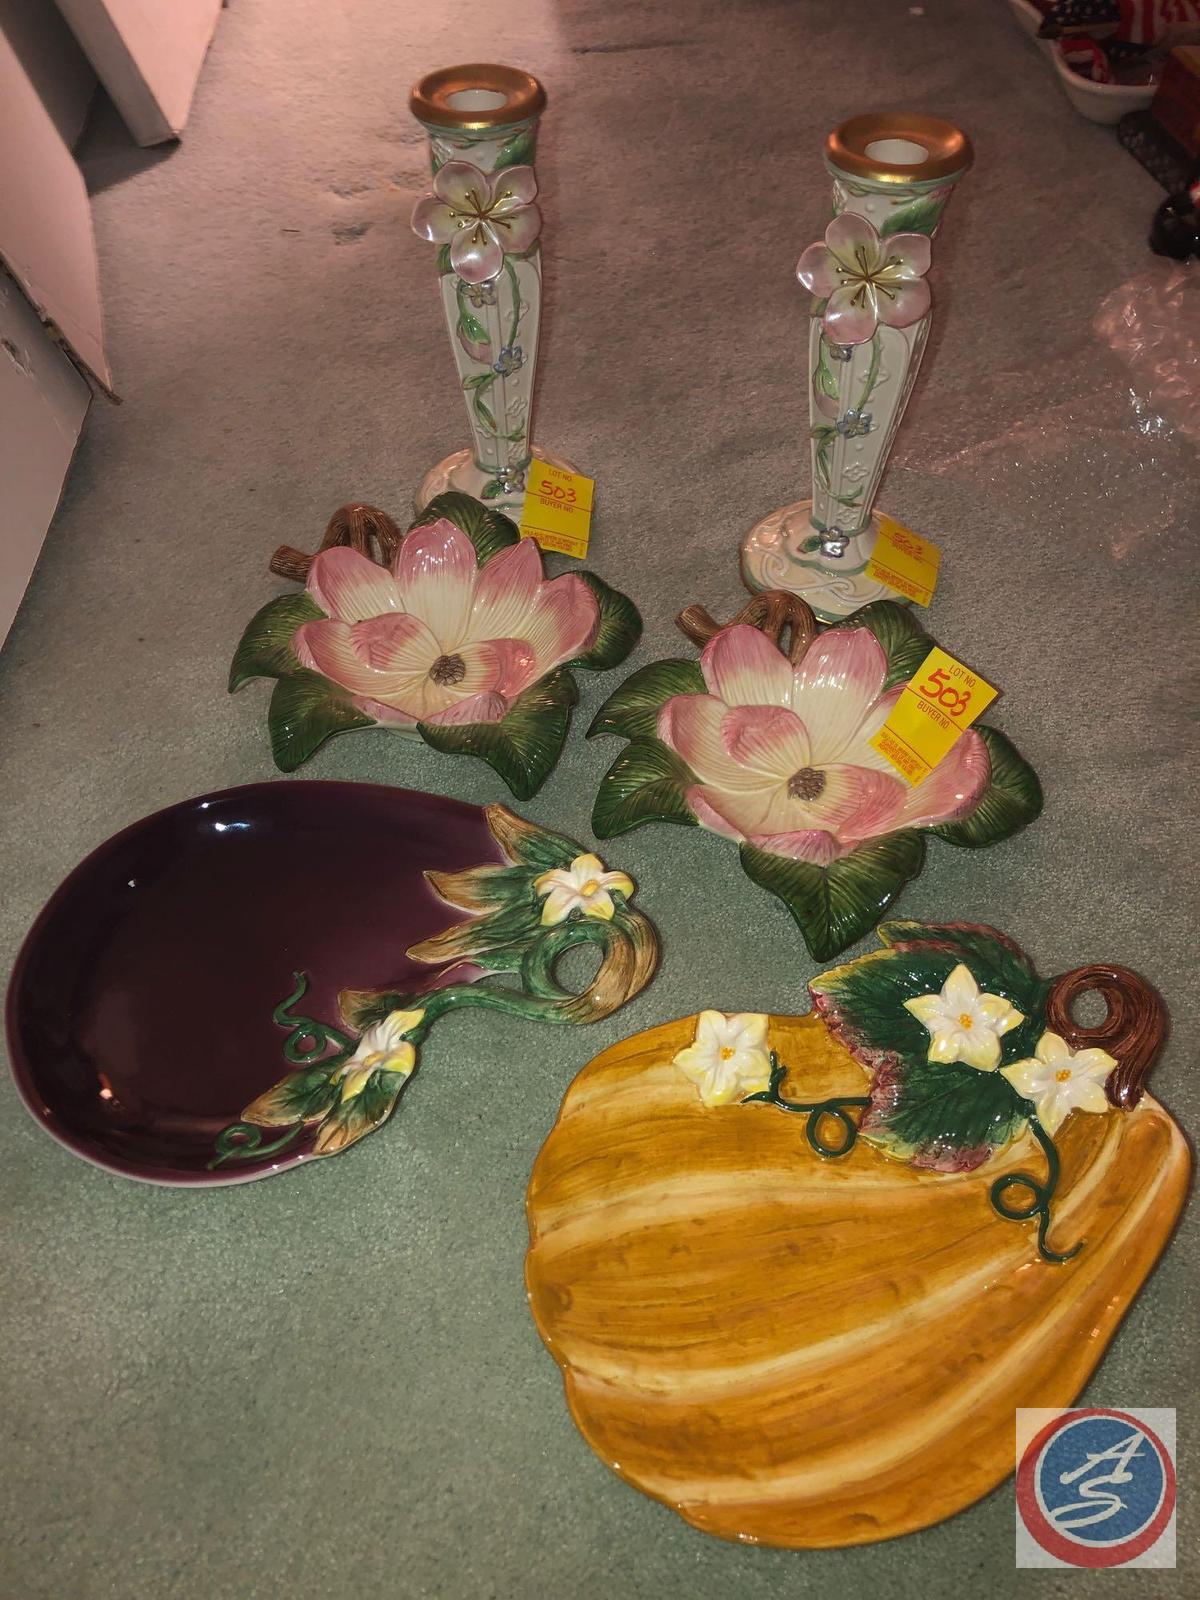 (2) Acorn Fitz and Floyd Classic Candy Dishes and (2) Flower Shaped Fitz and Floyd Candy Dishes and